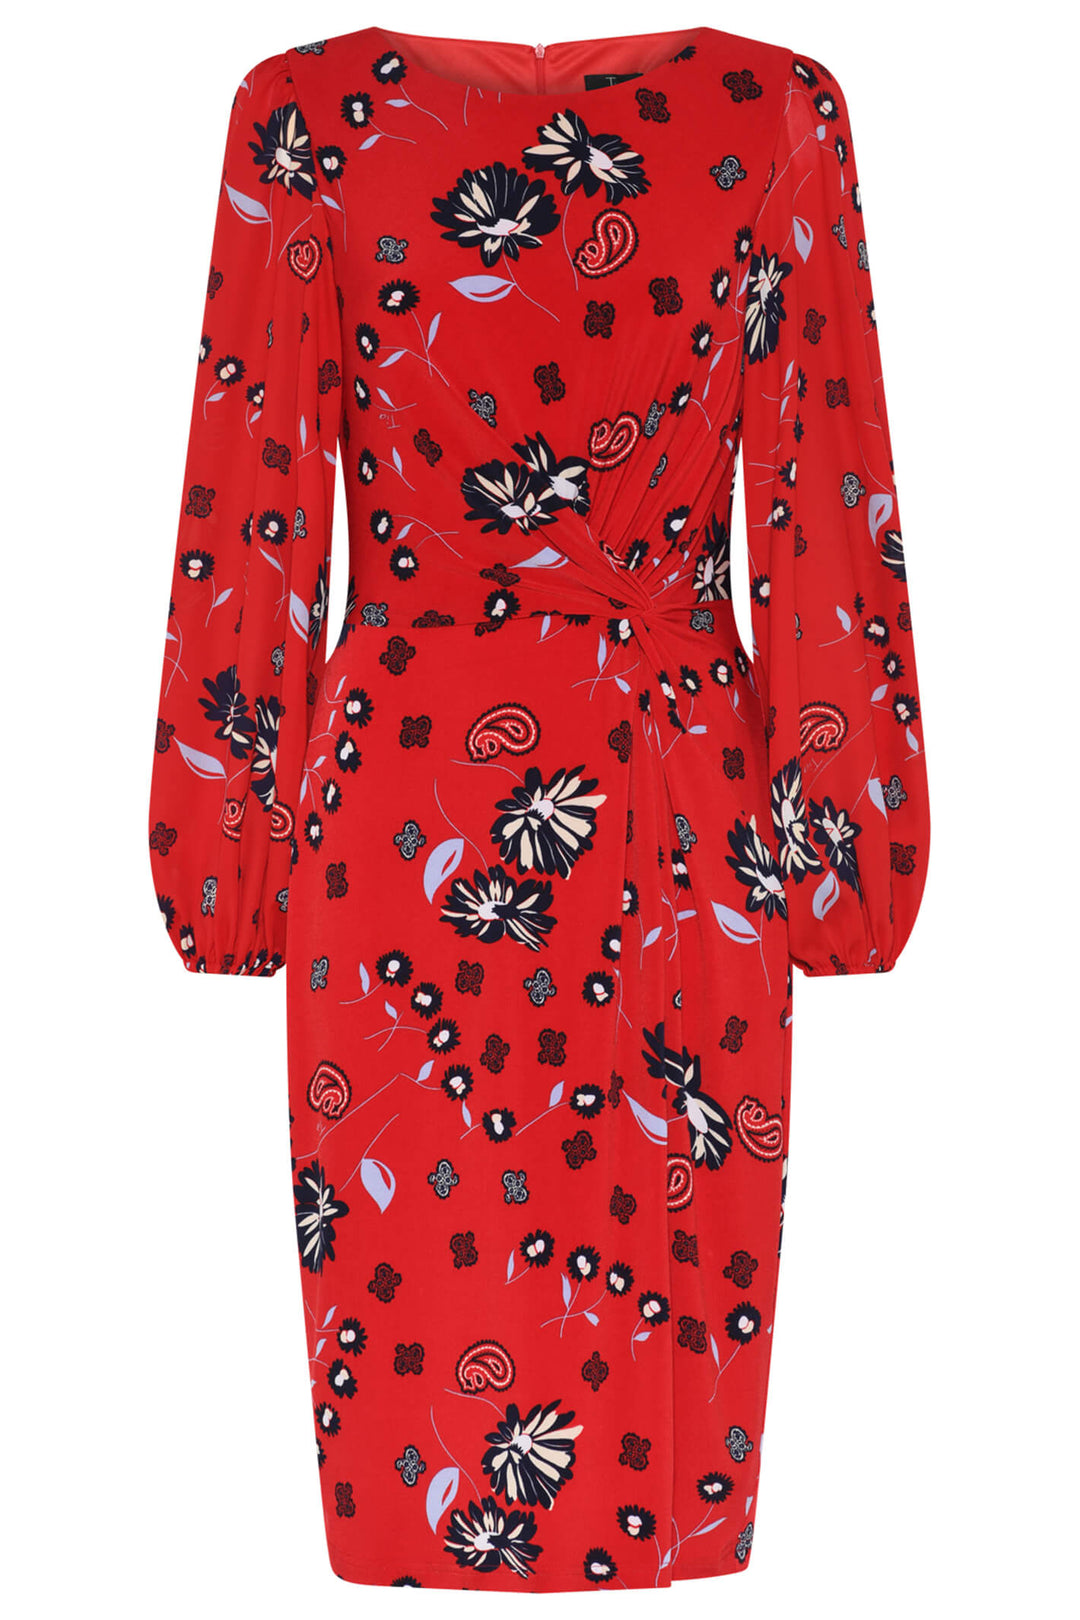 Tia 78173 Red Paisley Print Puff Sleeve Dress - Experience Boutique